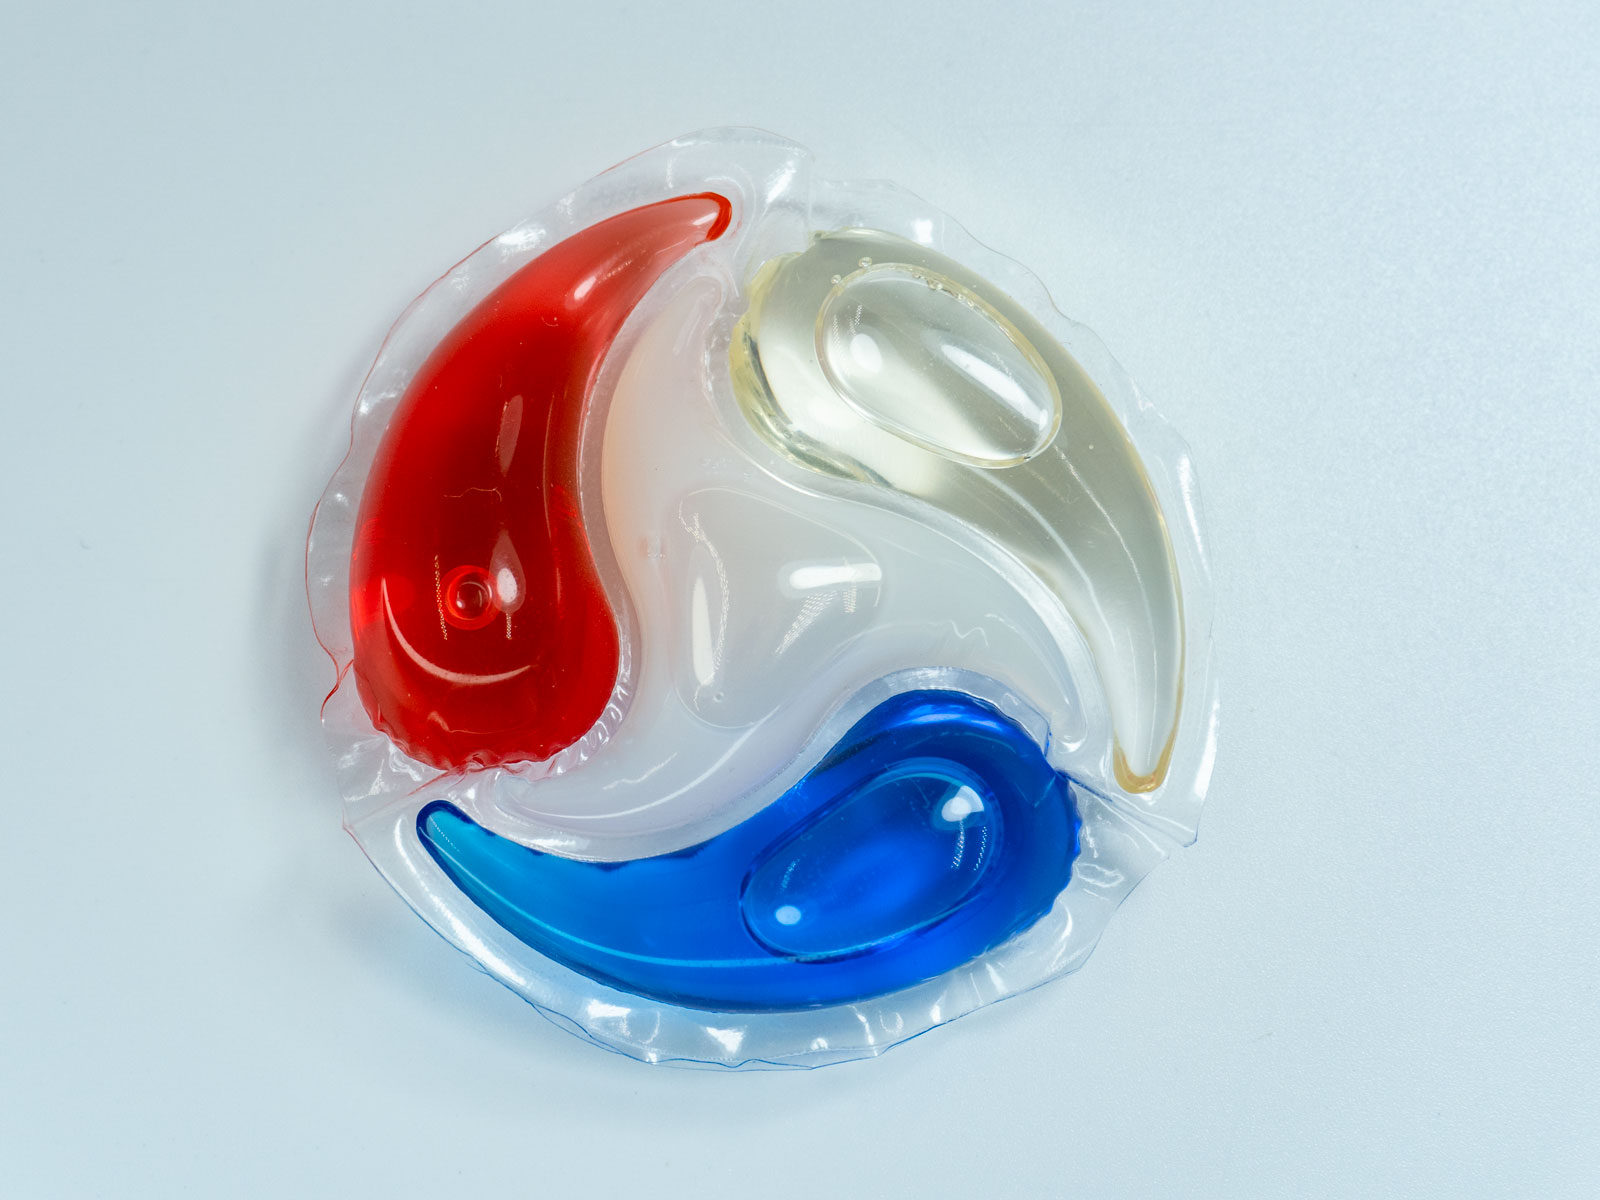 4 chambers disc cleaning laundry pods